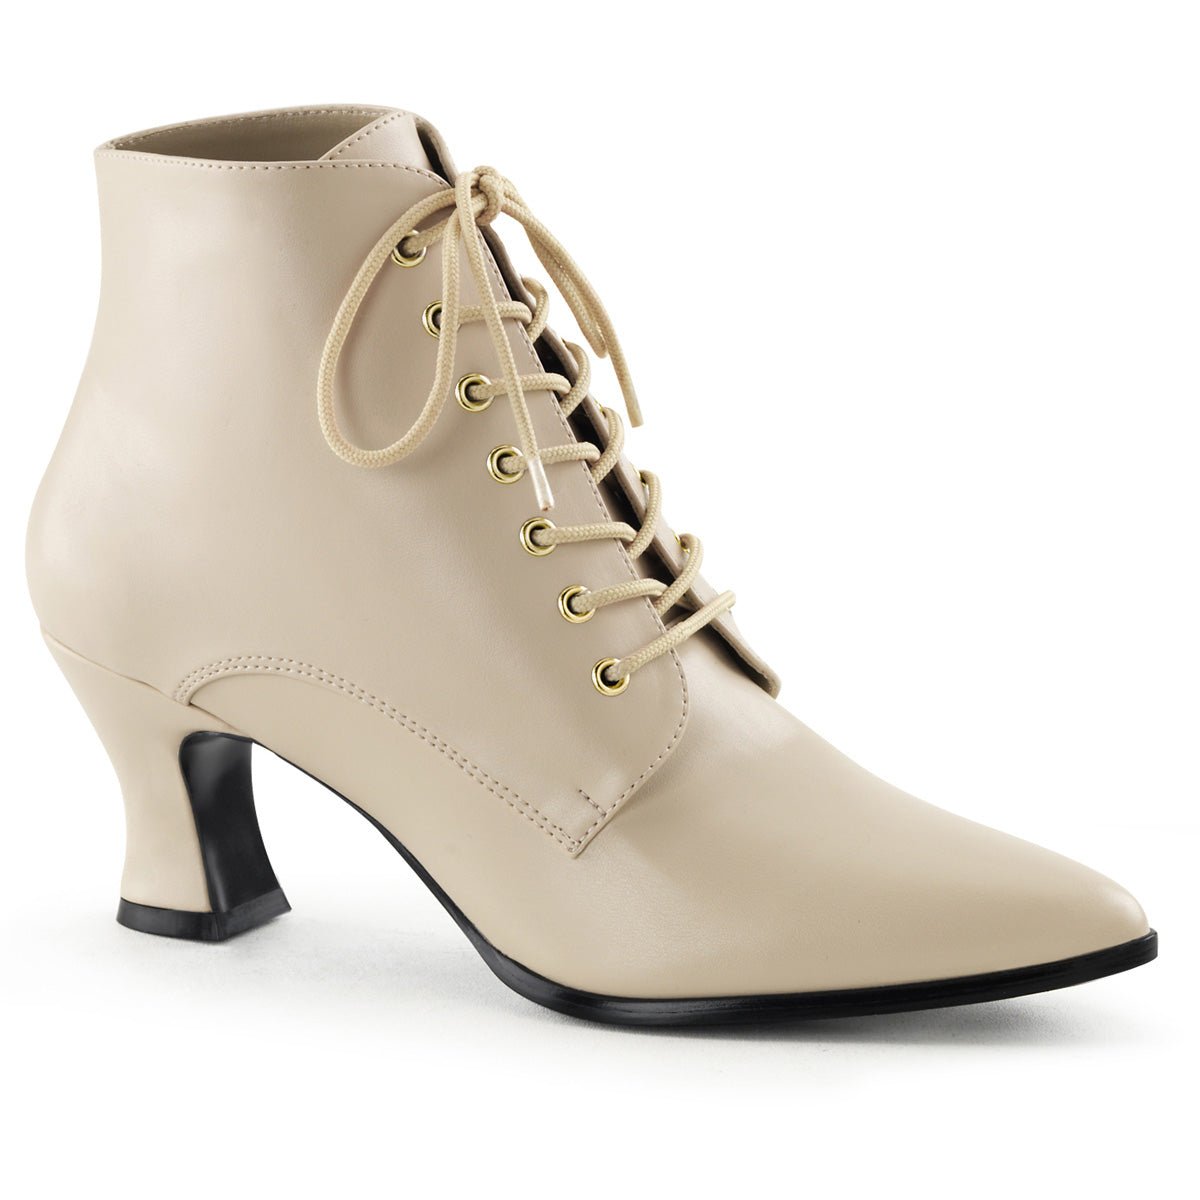 Clearance Funtasma Victorian 35 Cream Size 3UK/6USA - From Clearance Sold By Alternative Footwear